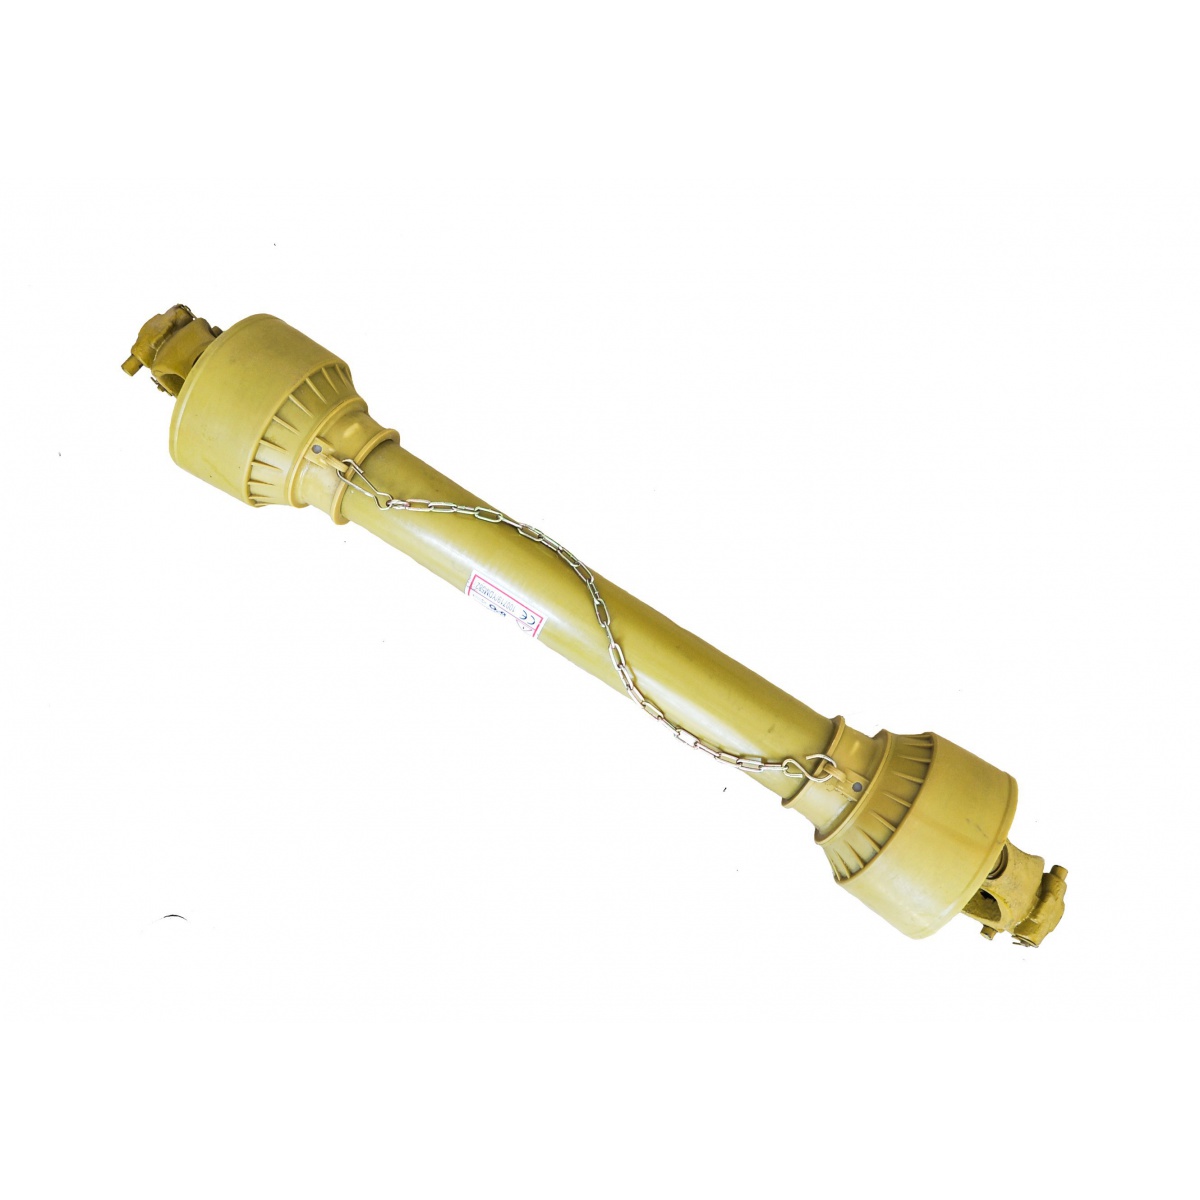 PTO shaft 07B - 70 cm / up to 105 HP